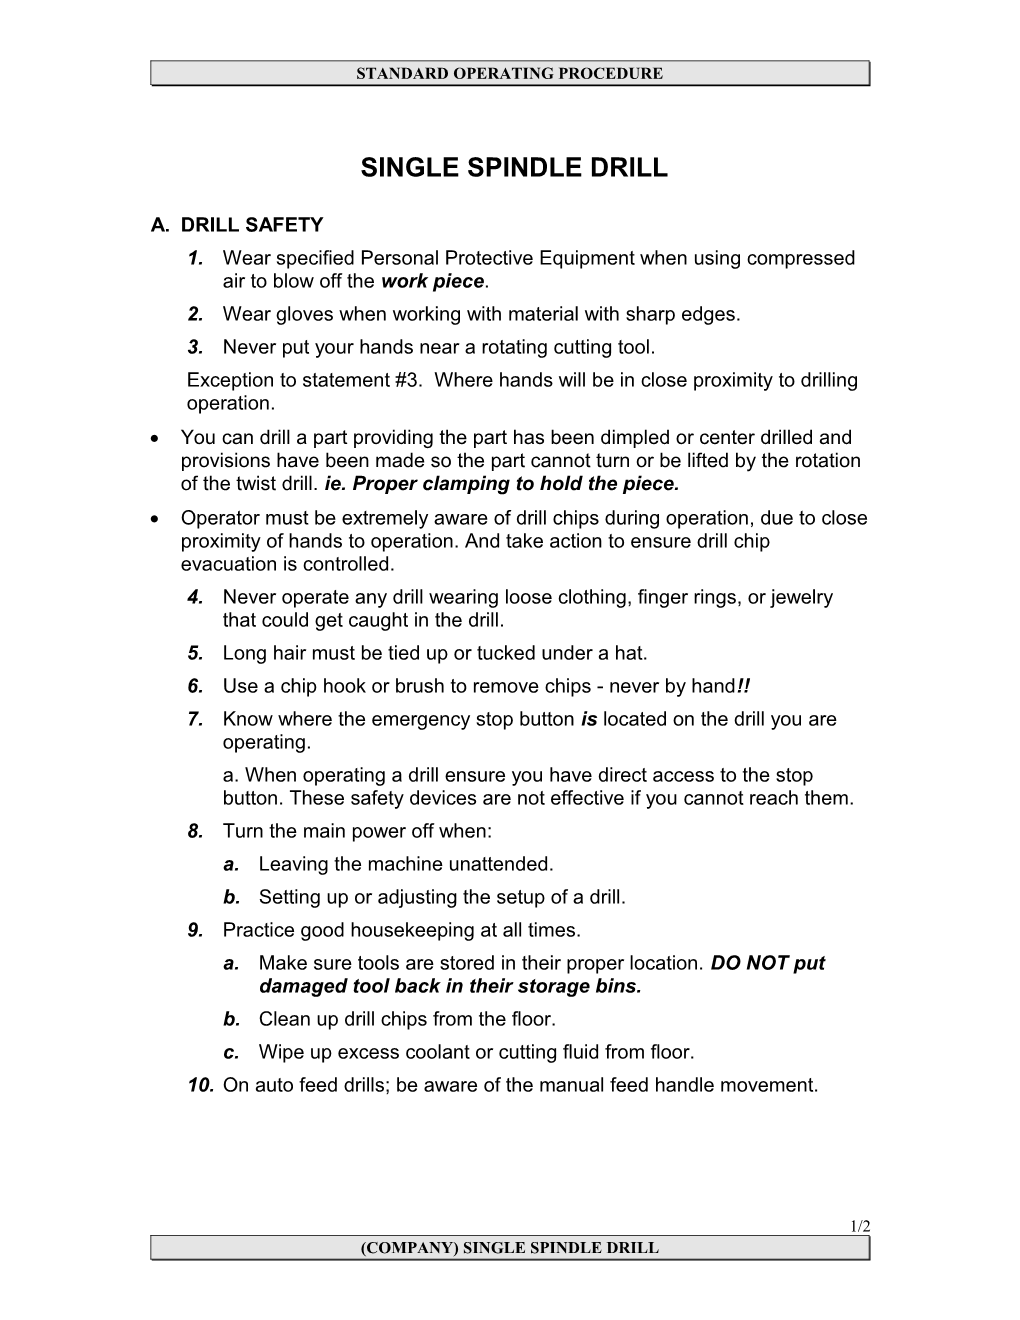 Single Spindle Drill